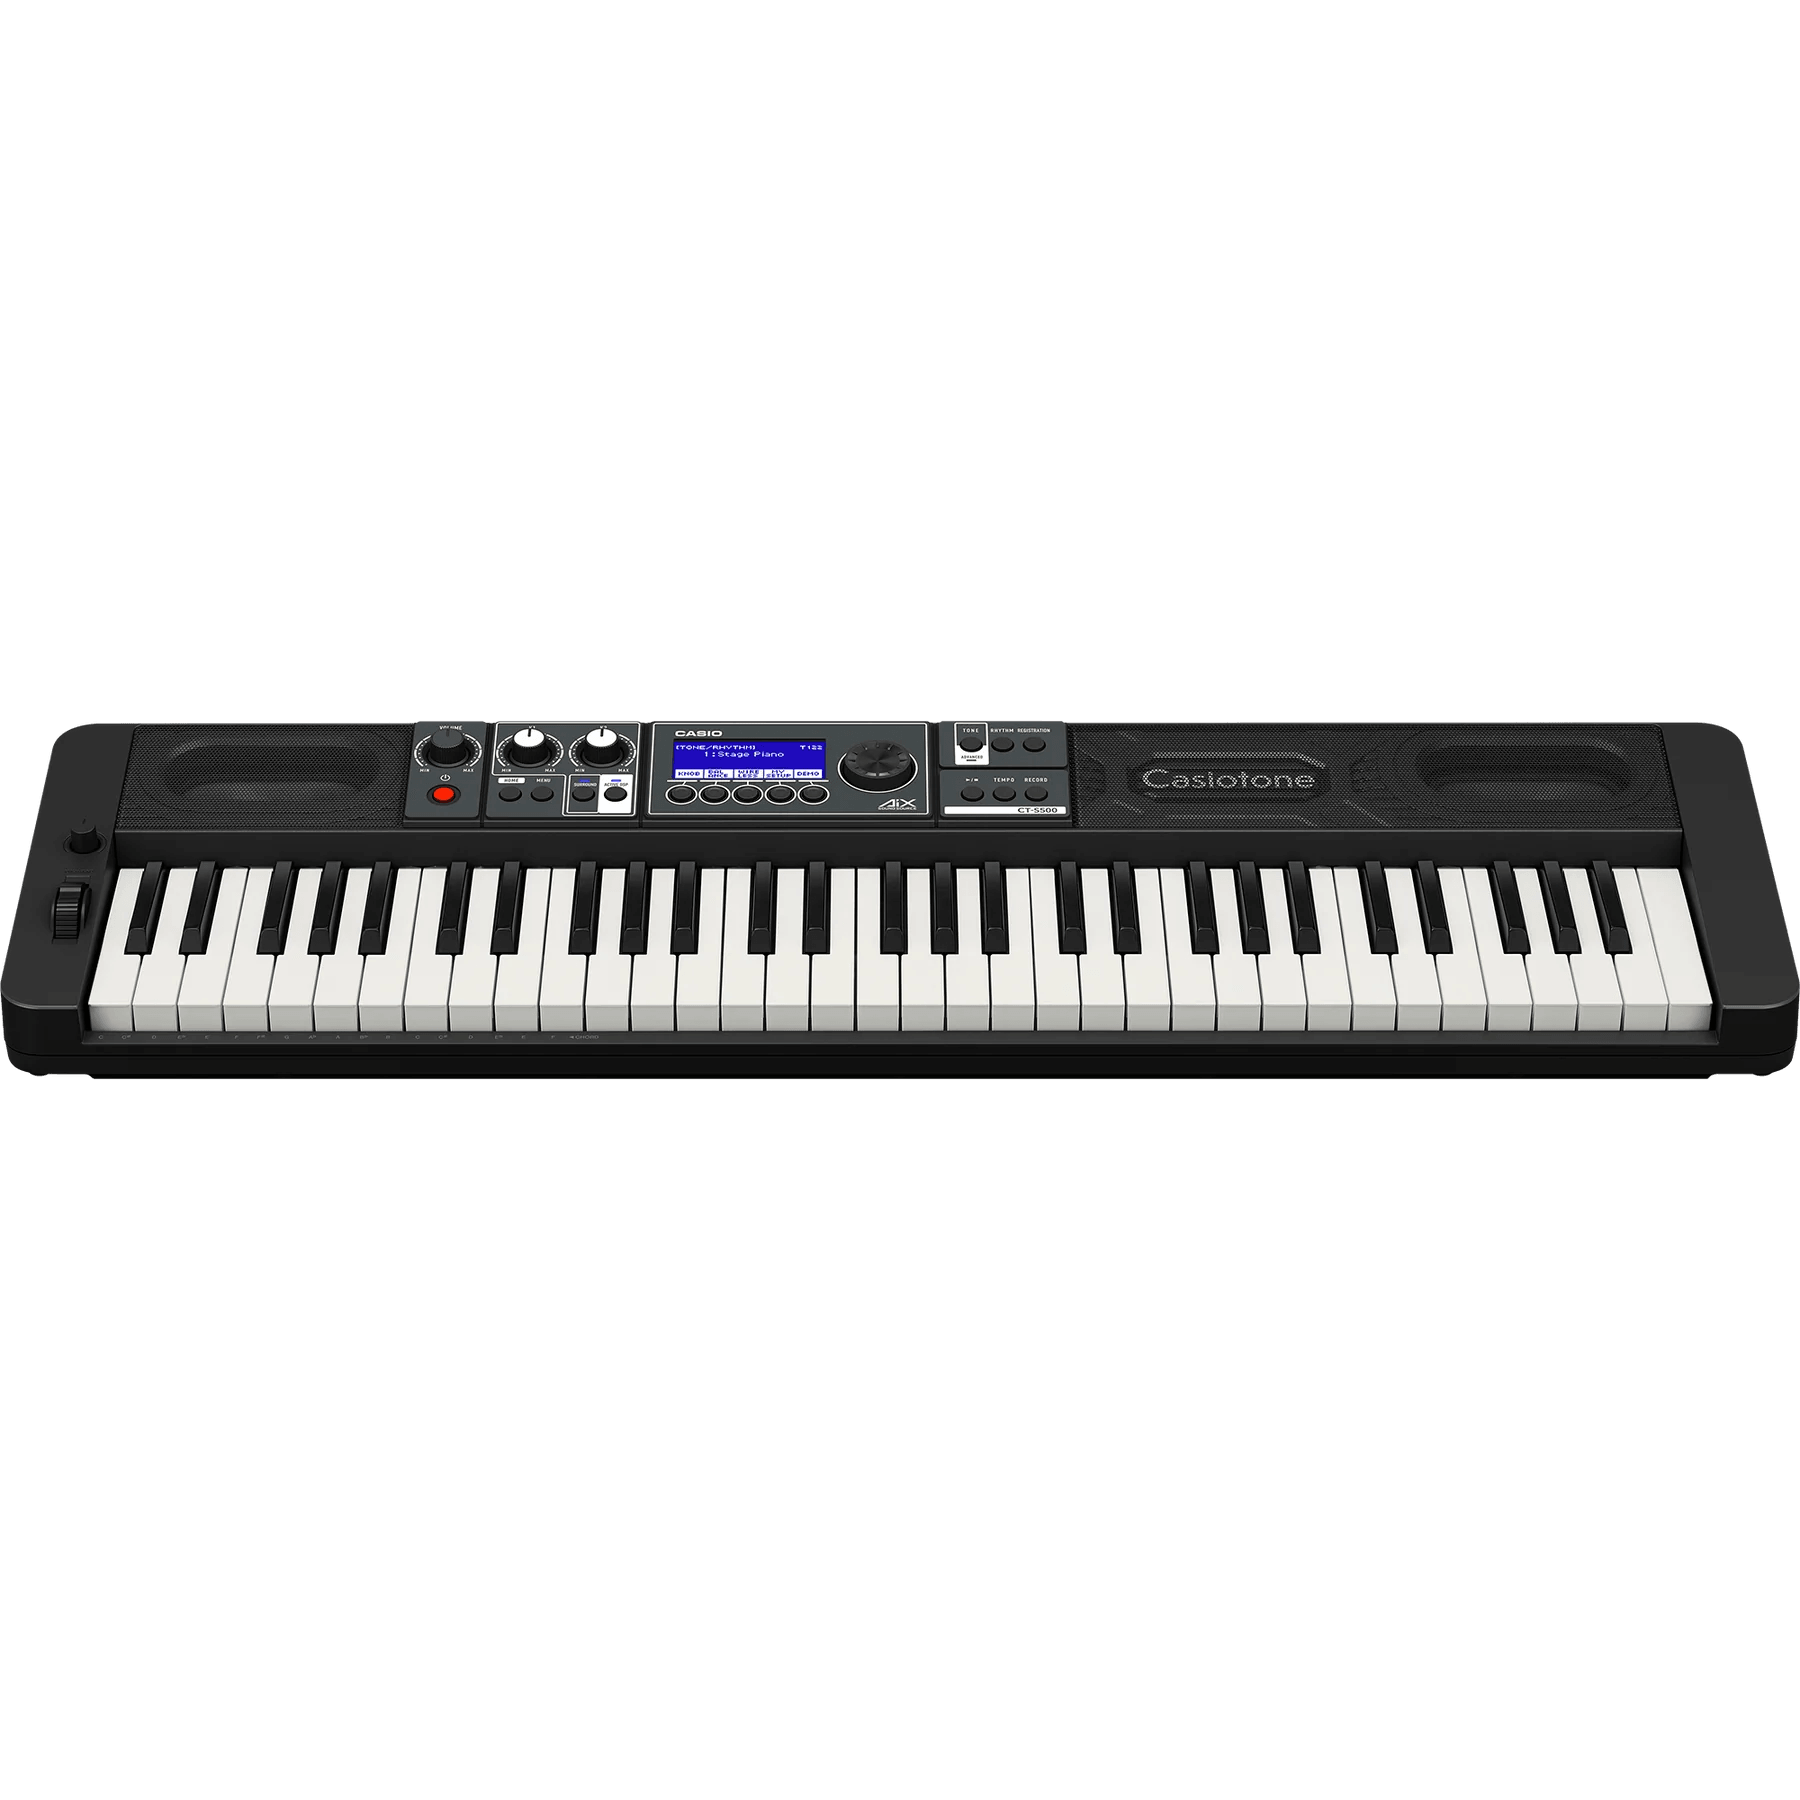 Casio CTS500 Keyboard - Keyboards by Casio at Muso's Stuff